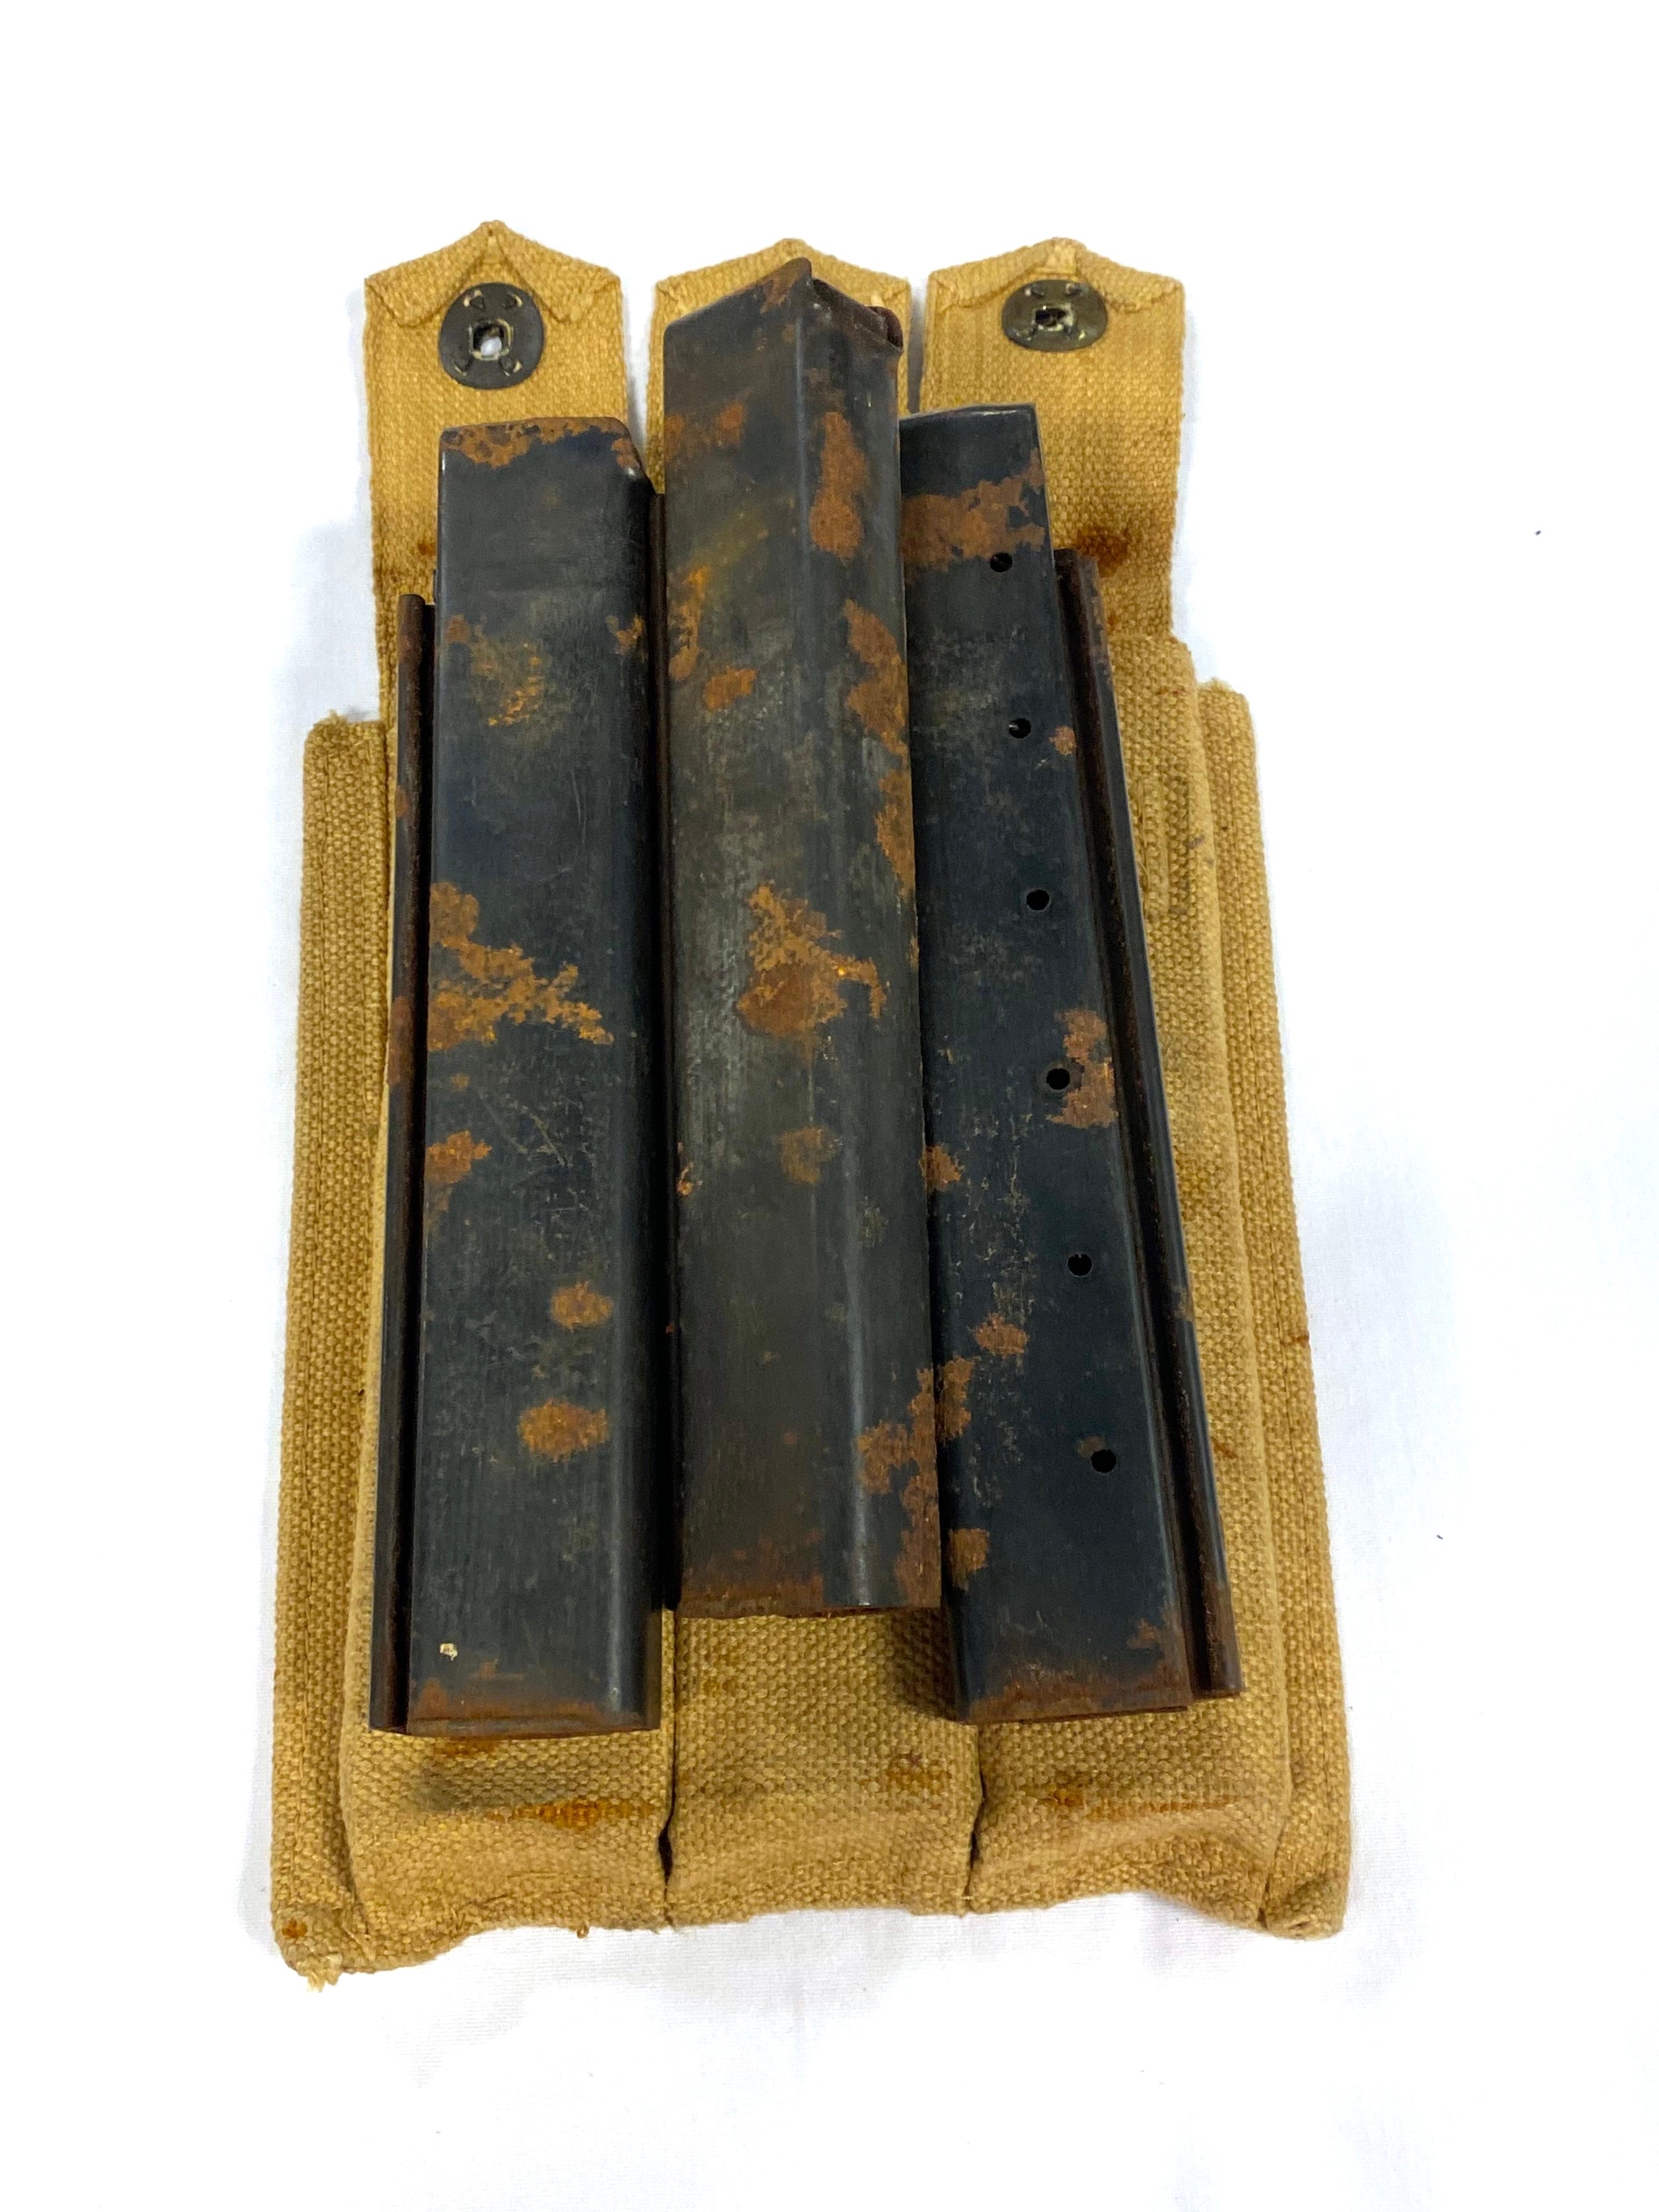 US Thompson Magazines and Pouch by Medcorp Saddlery Co. 1942